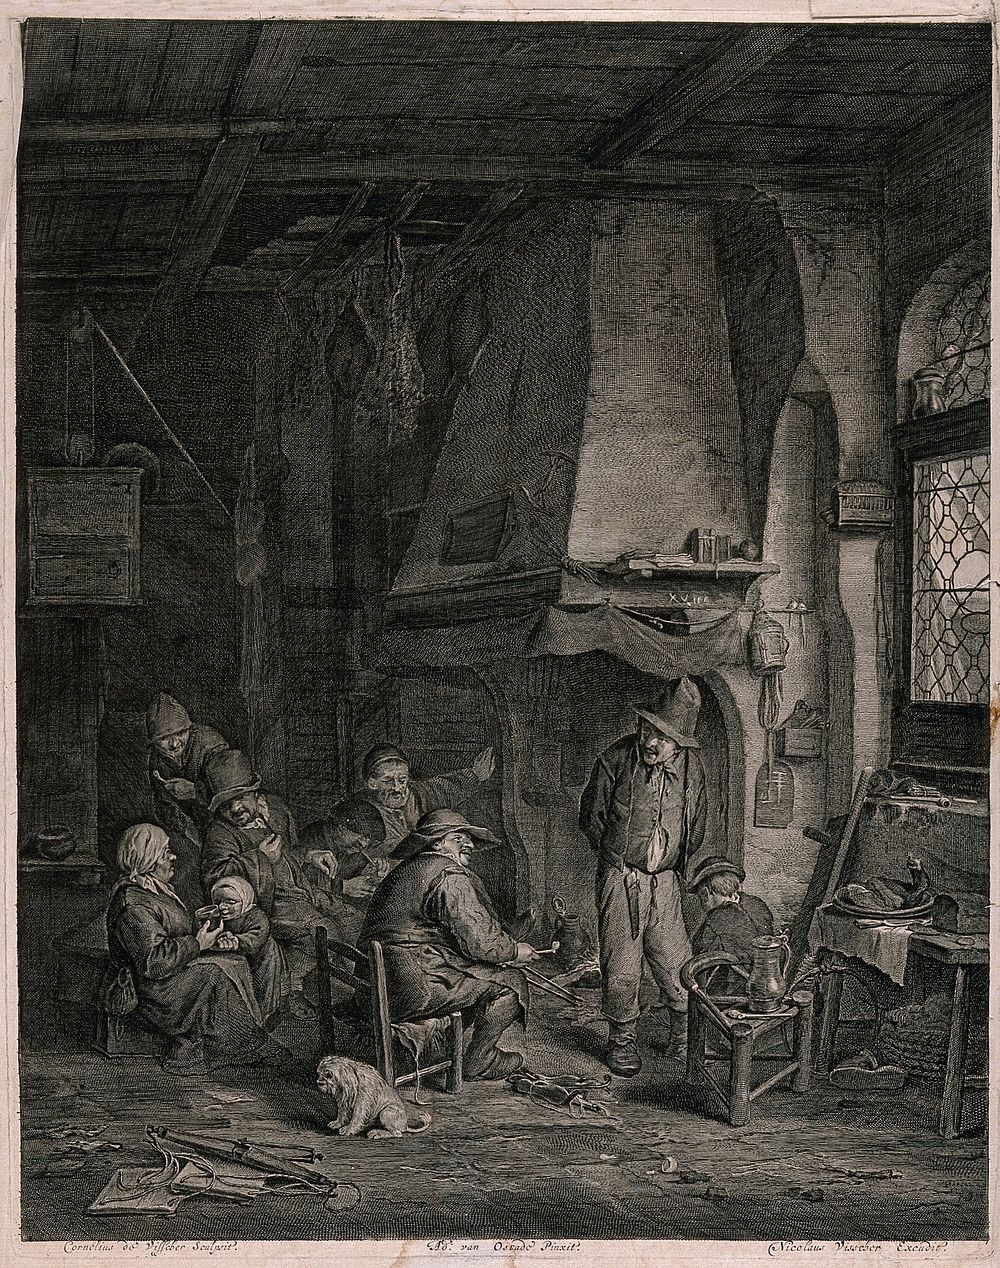 A family gather indoors round a large open fireplace talking and smoking. Engraving by C. de Visscher after A. van Ostade…